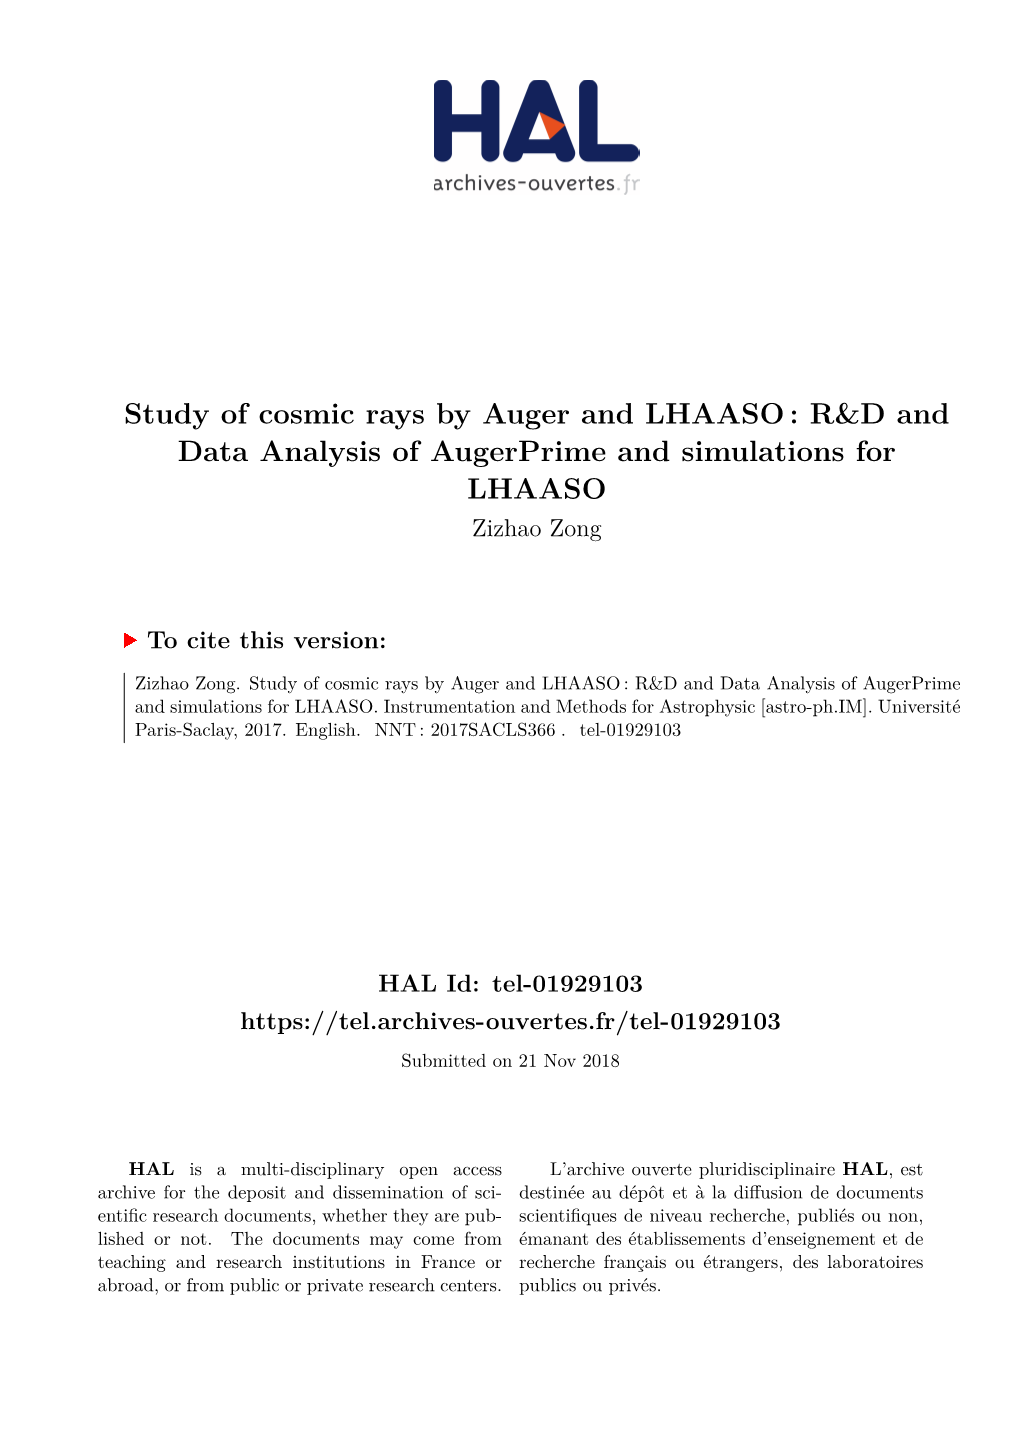 Study of Cosmic Rays by Auger and LHAASO : R&D and Data Analysis of Augerprime and Simulations for LHAASO Zizhao Zong